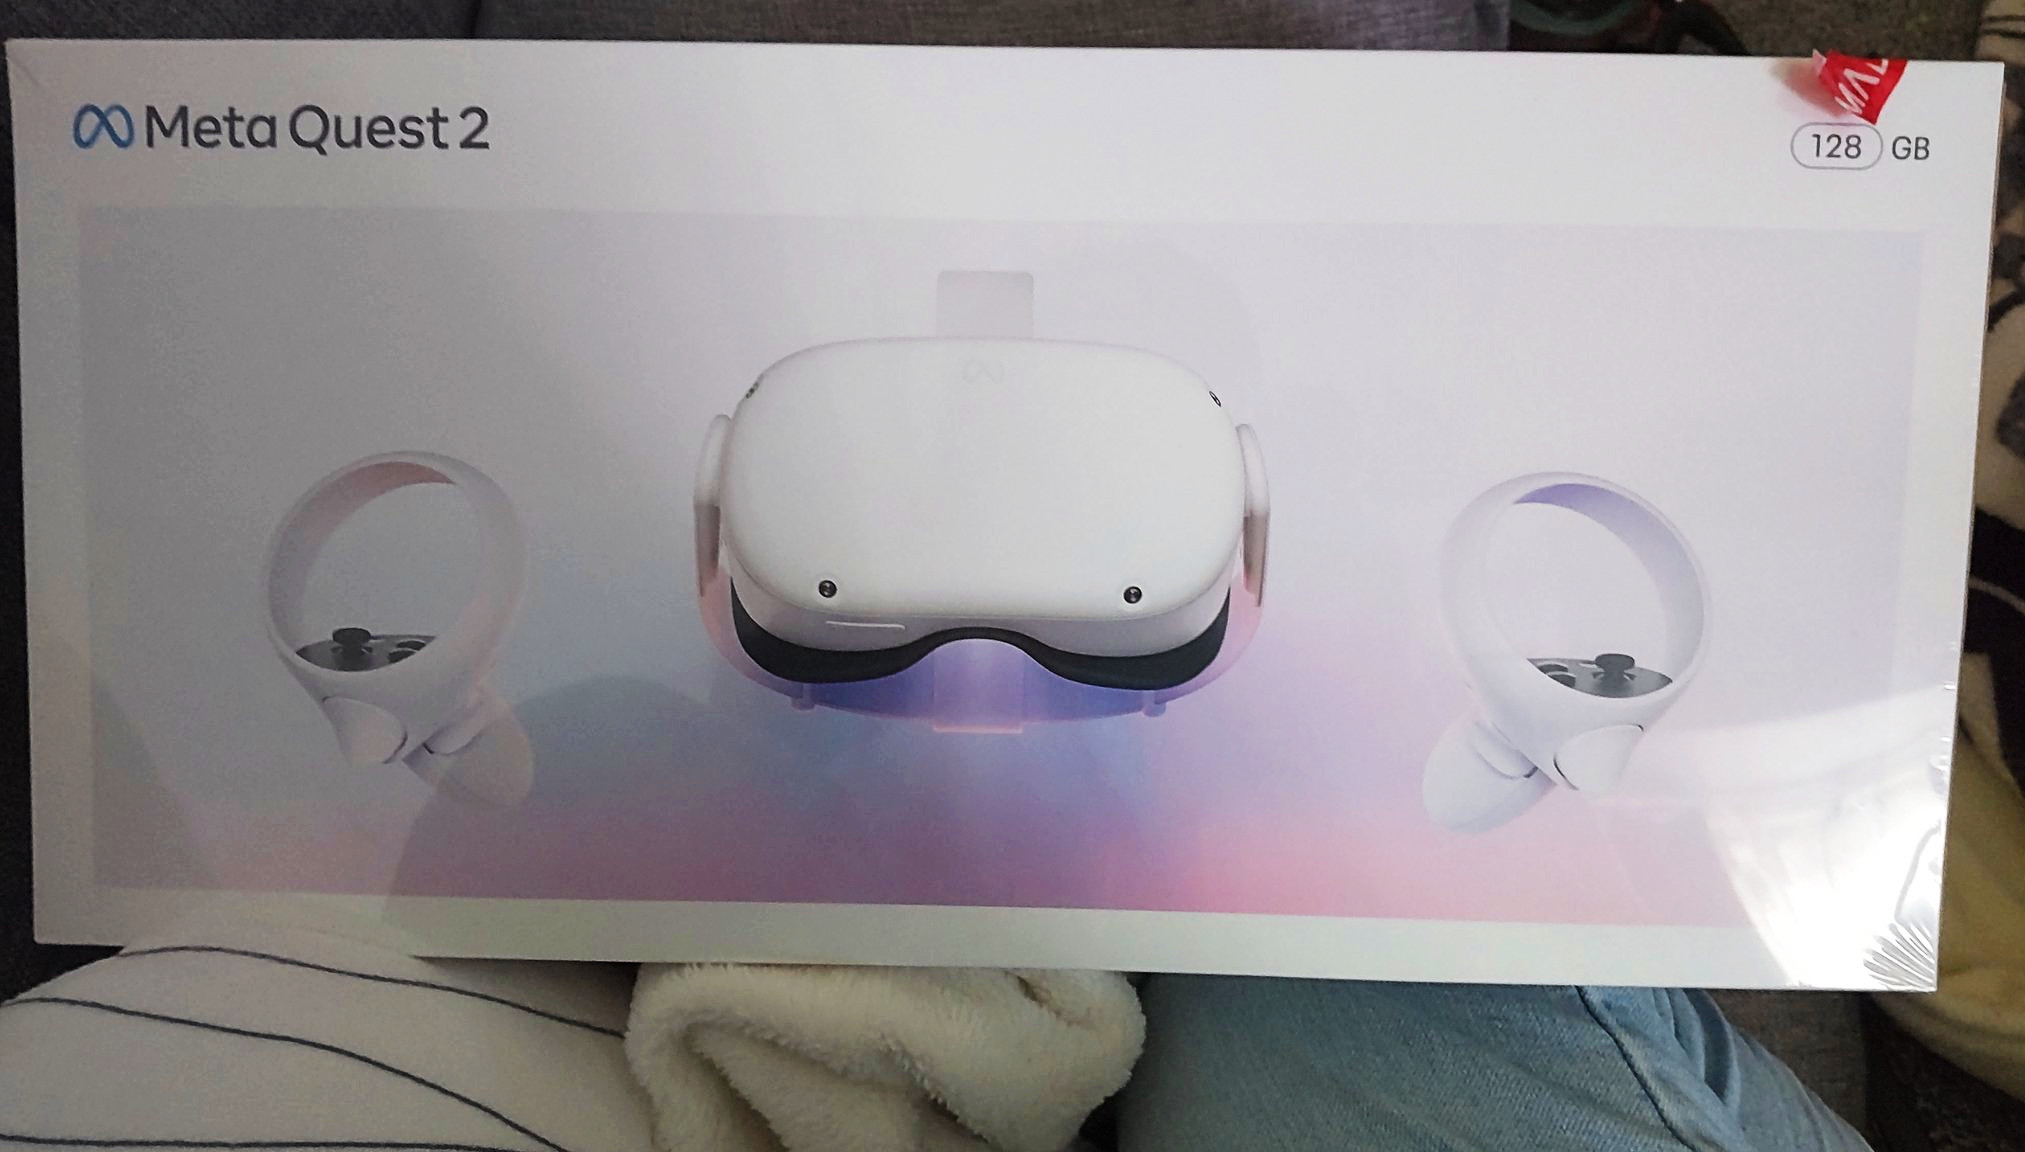 The Oculus Quest 2 is no more, long live the Meta Quest 2